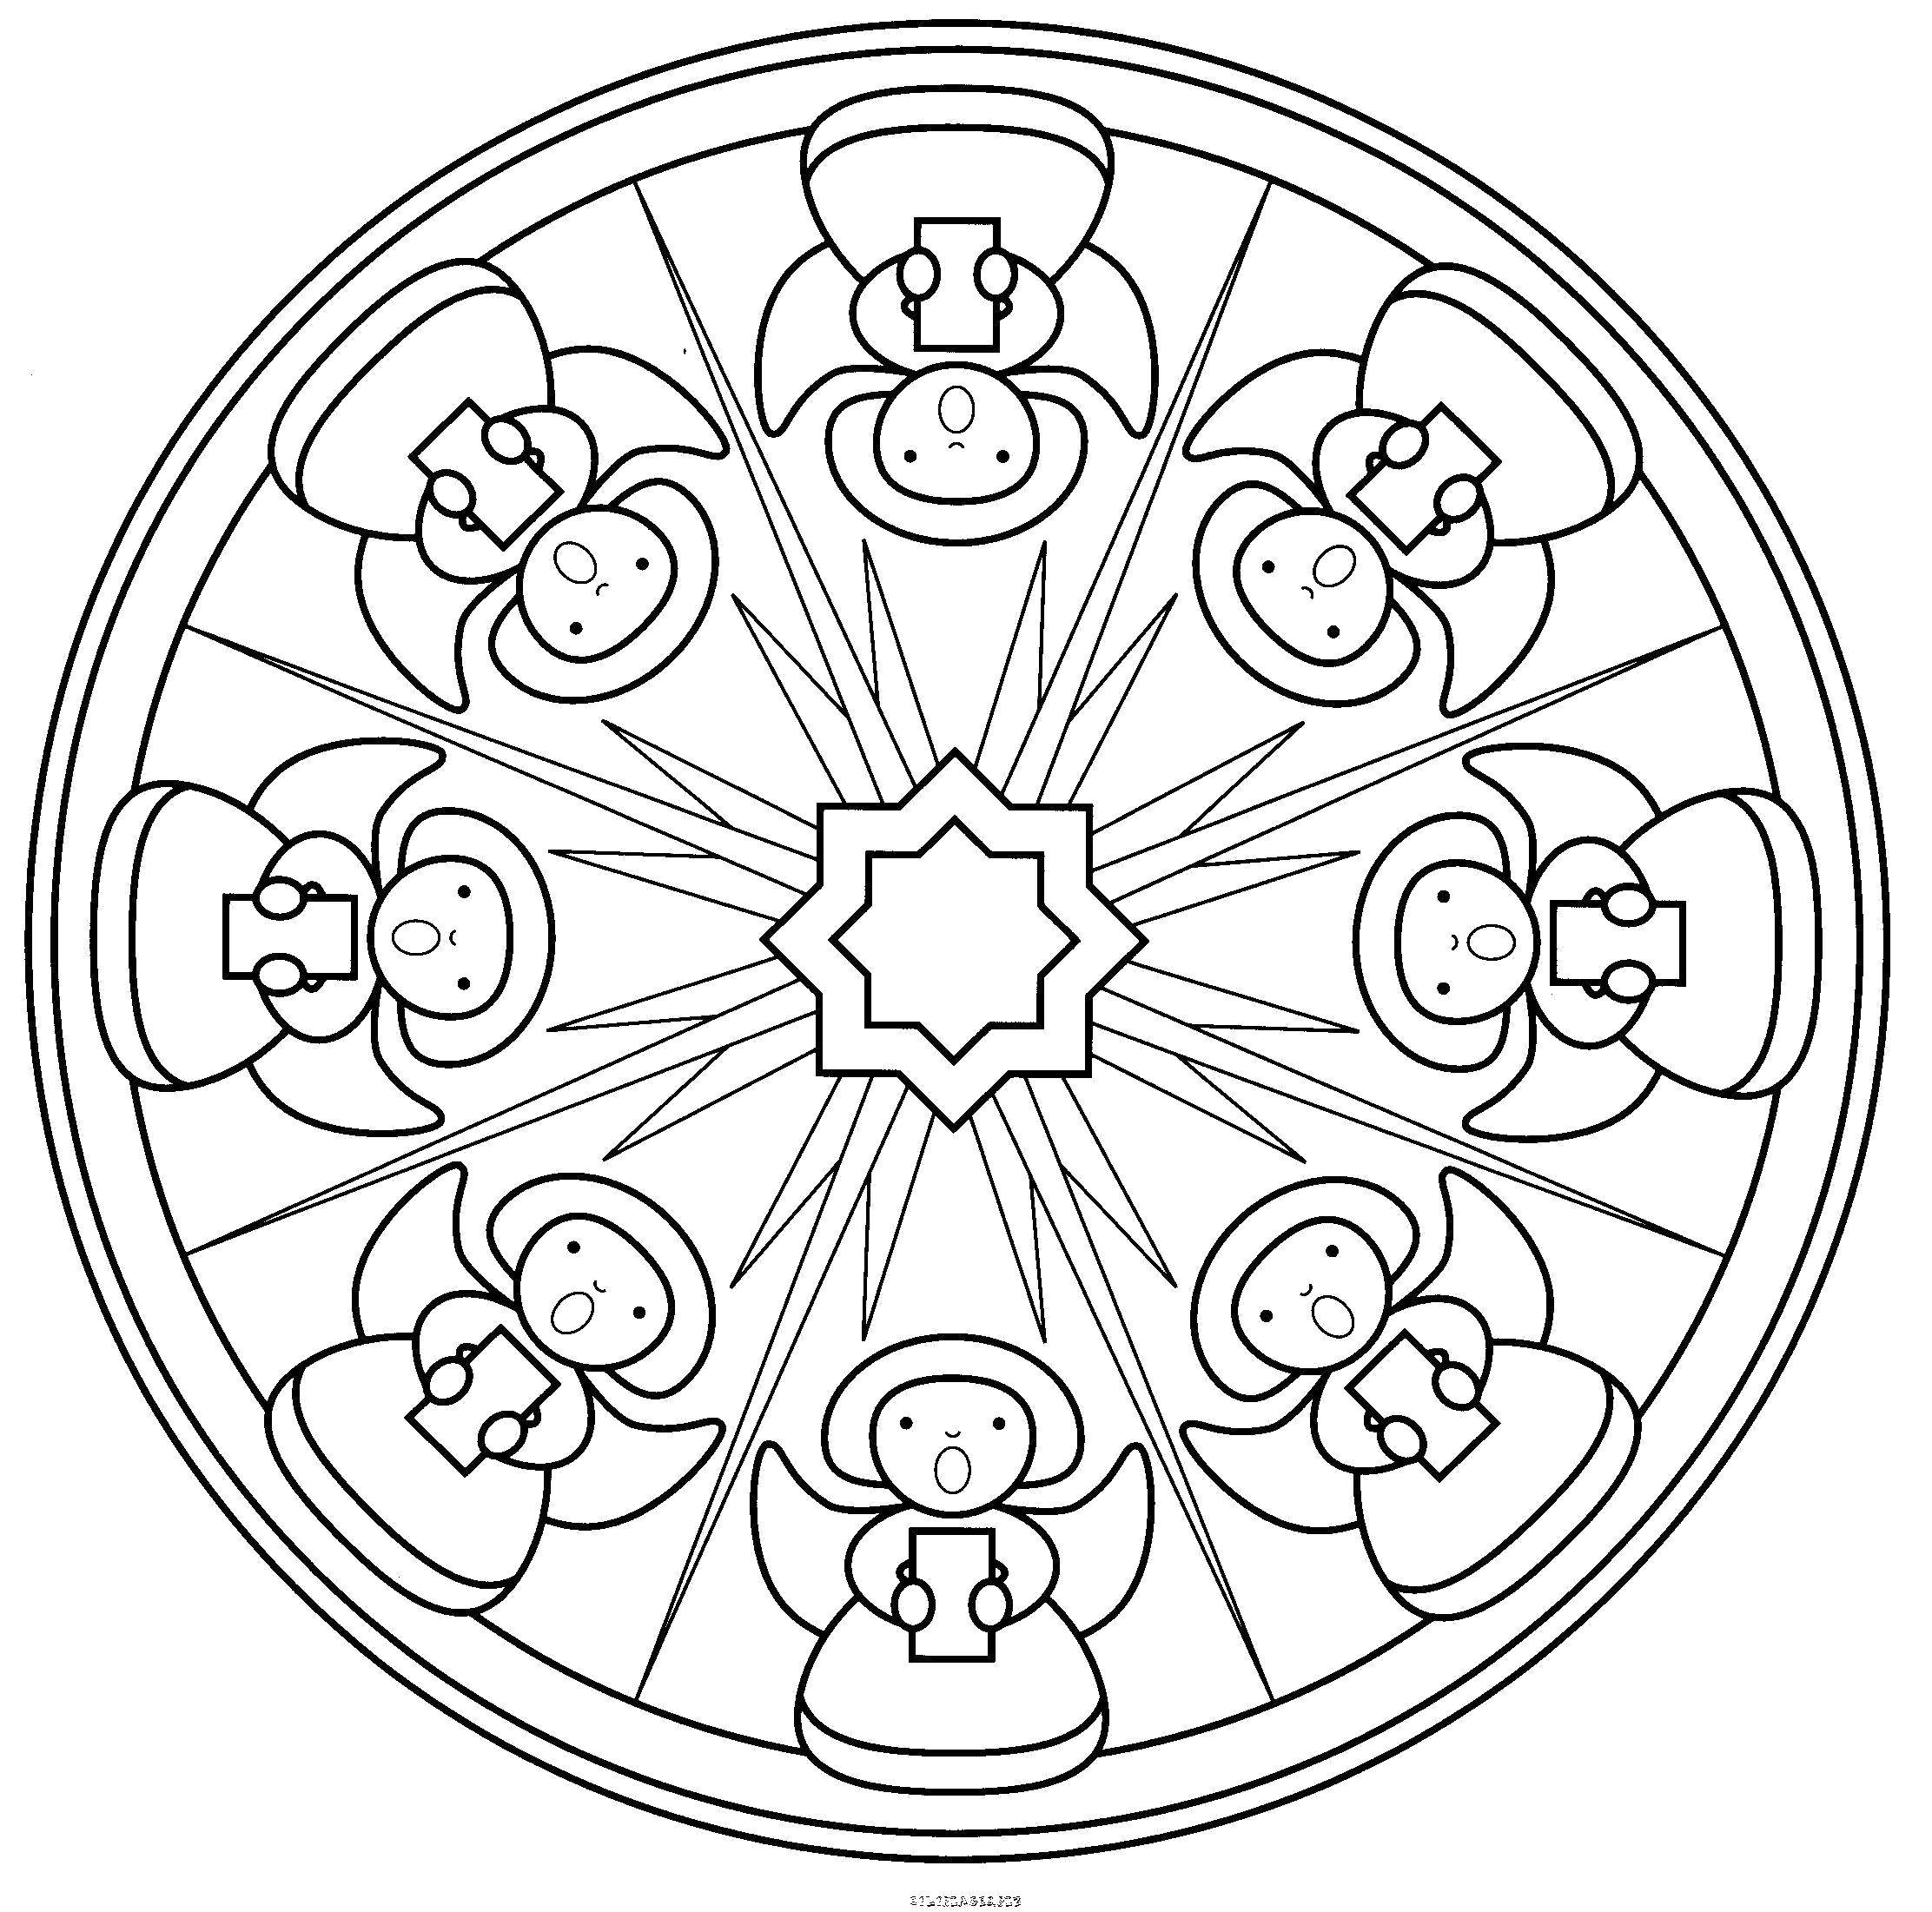 Coloring Patterned circle. Category plate. Tags:  Patterns, geometric.